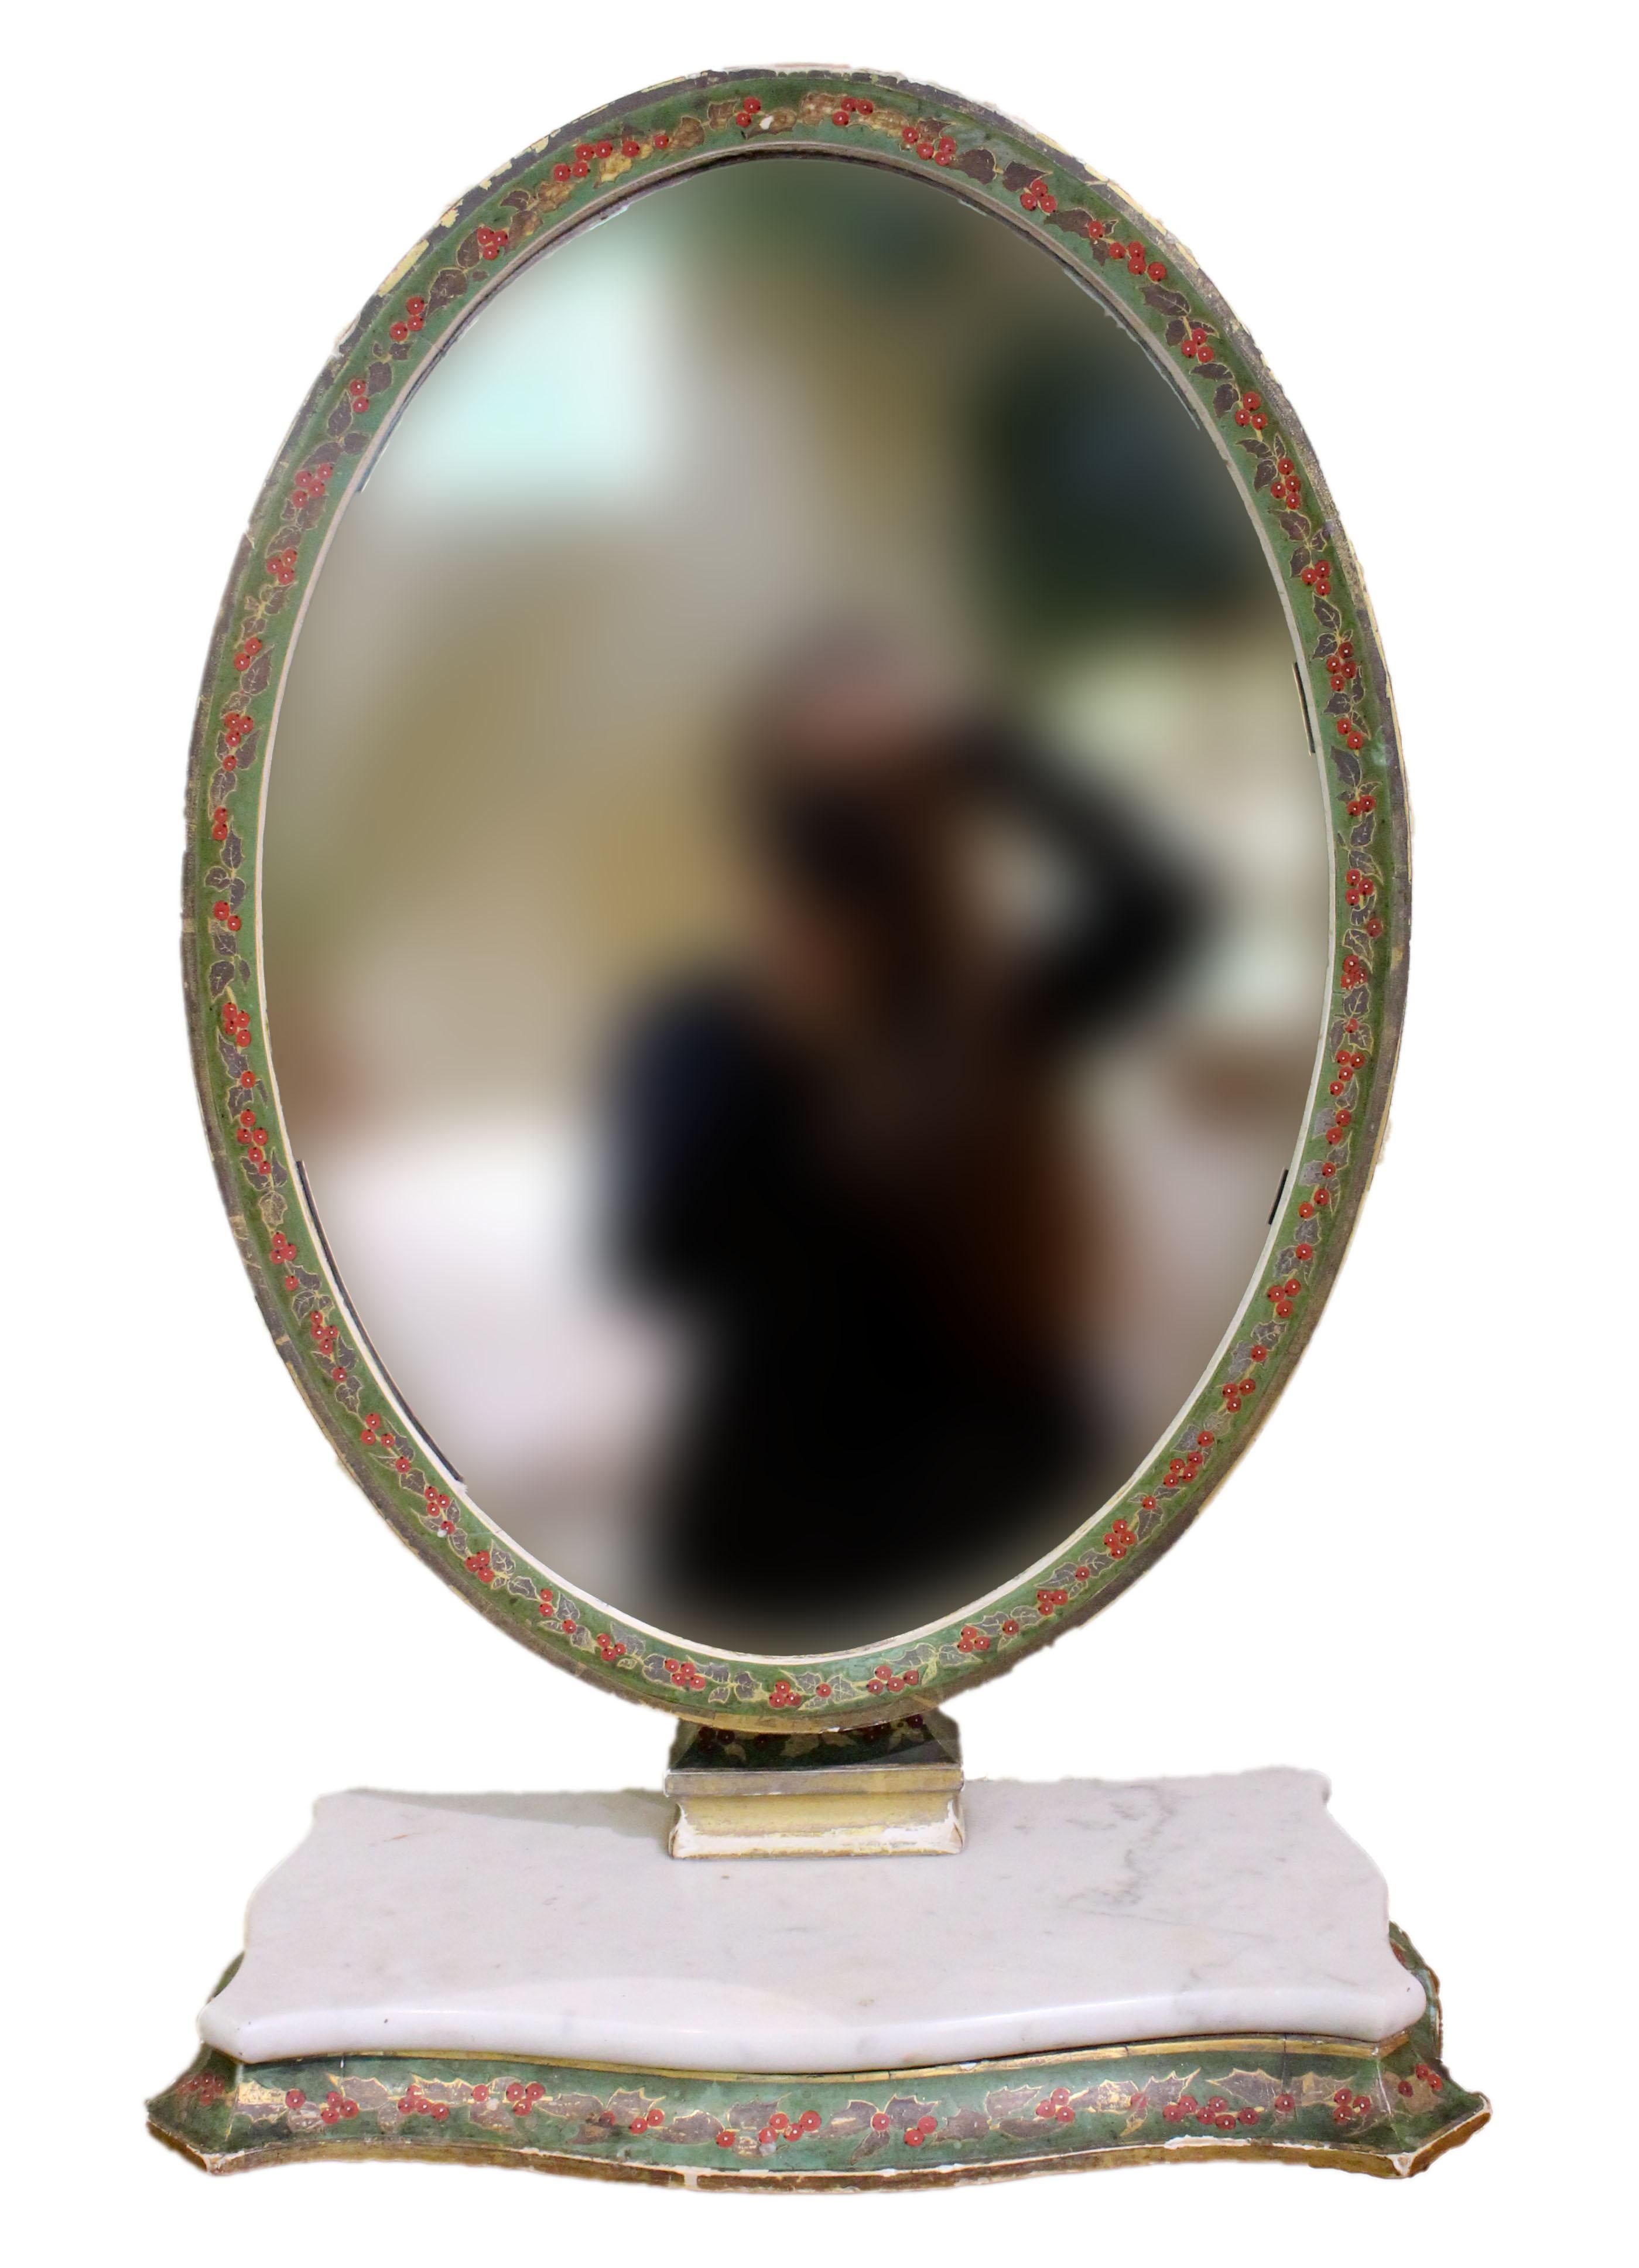 Venetian oval dressing table mirror, circa 1860. Painted in green with holly leaves & berries & gilt edging. Marble base surface. Double locks to adjust mirror angle. Provenance: Katharine Reid, former director Cleveland Museum of Art. 18 1/4